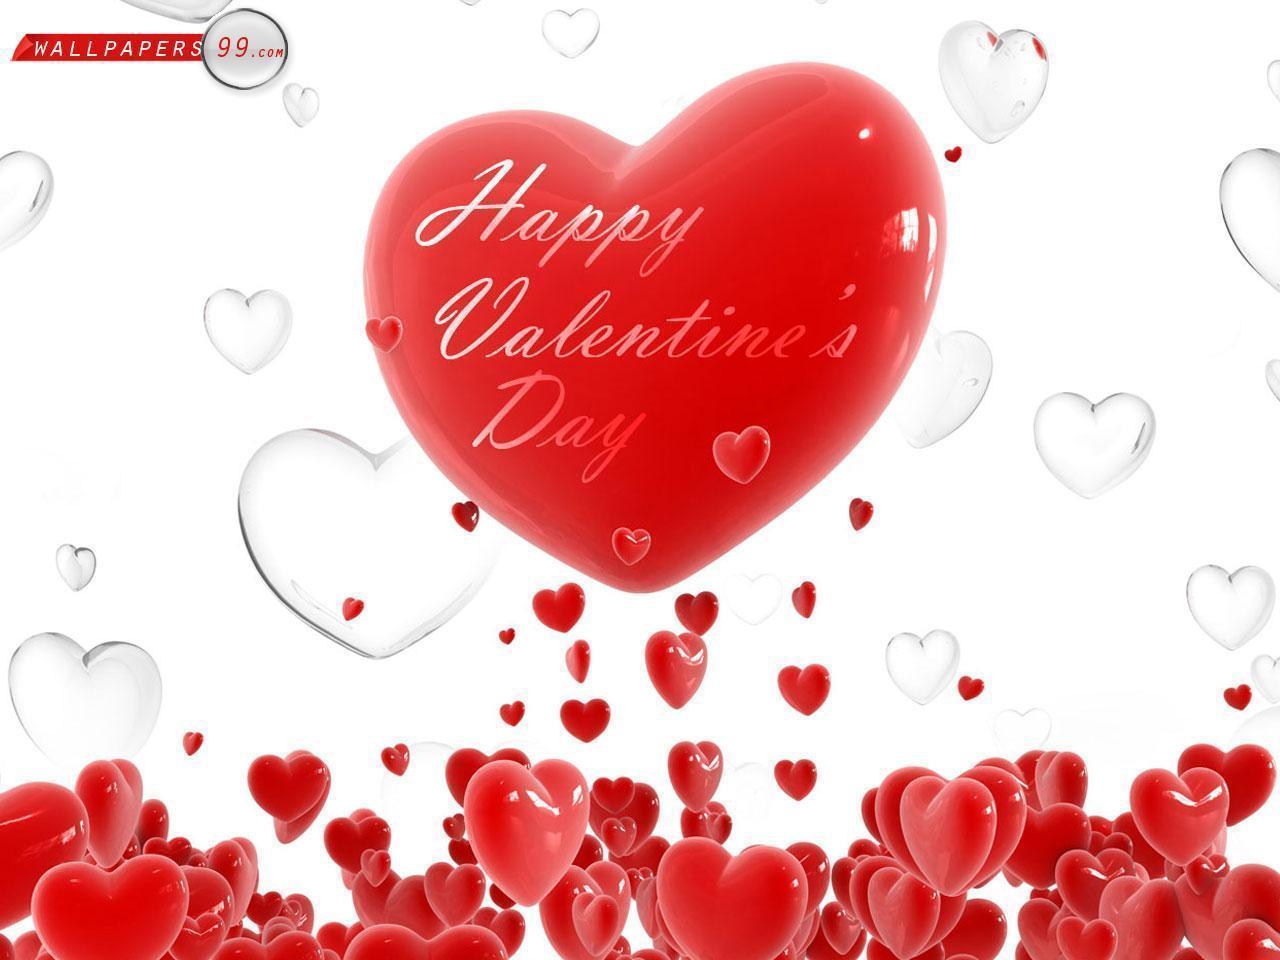 Happy Valentines Day Wallpaper Picture Image 1280x960 34069